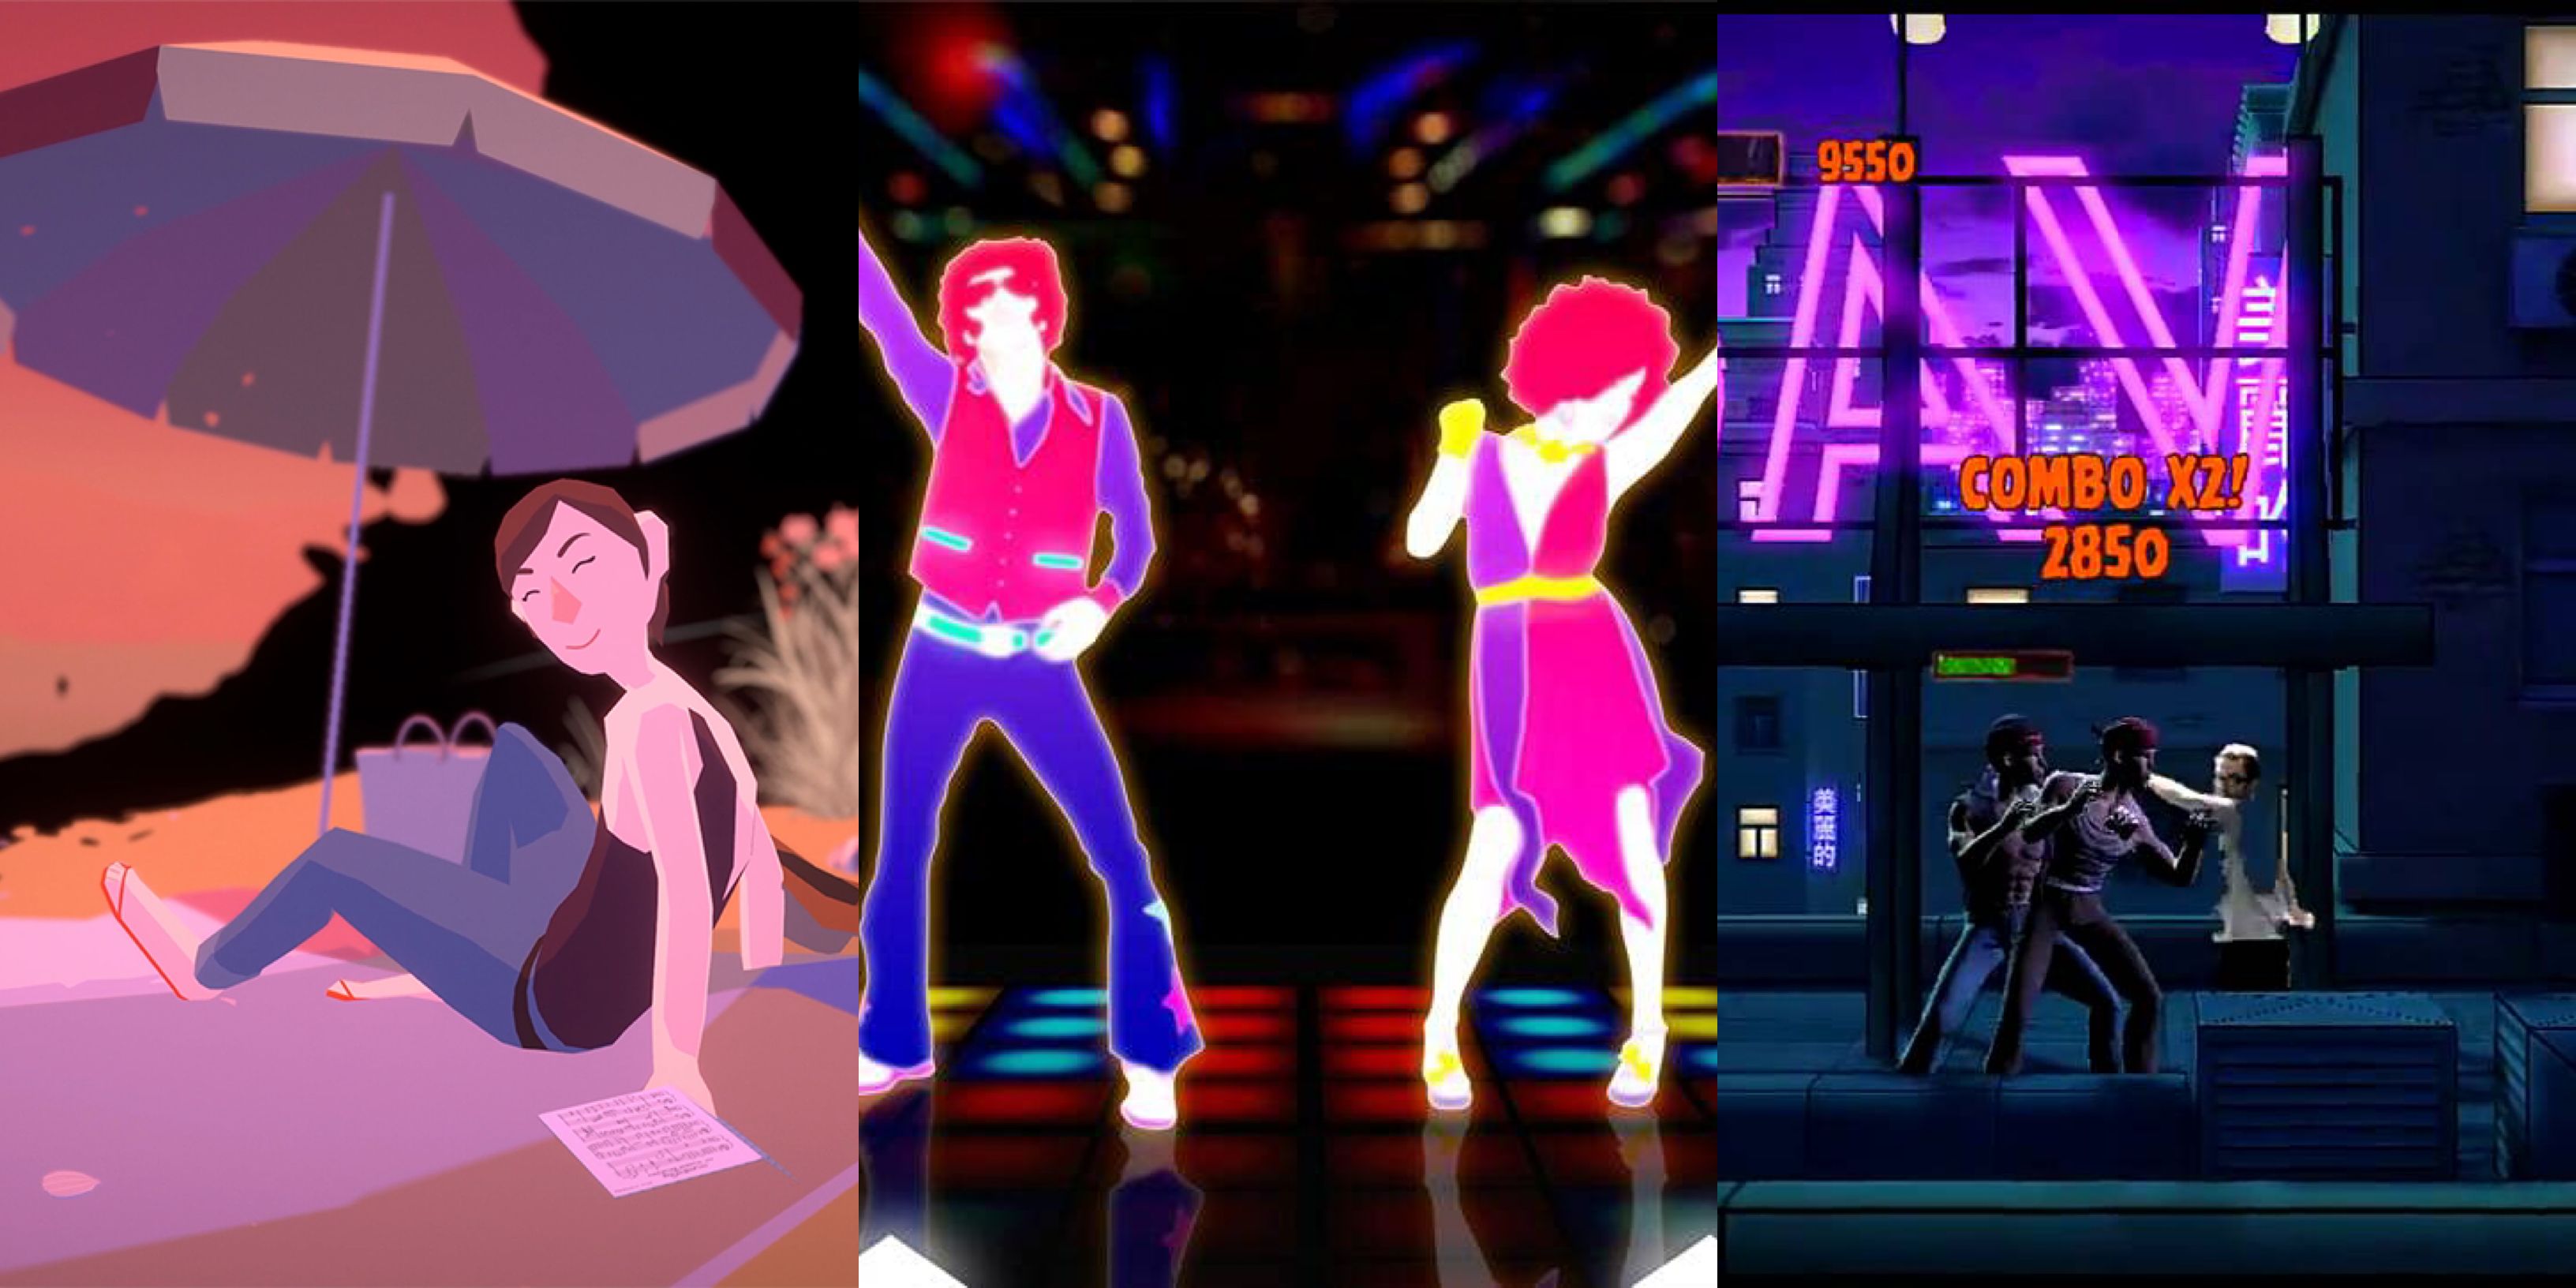 Games that good use of the webcam: Before Your Eyes (left), Just Dance 2 (middle), Kung-Fu Live (right)